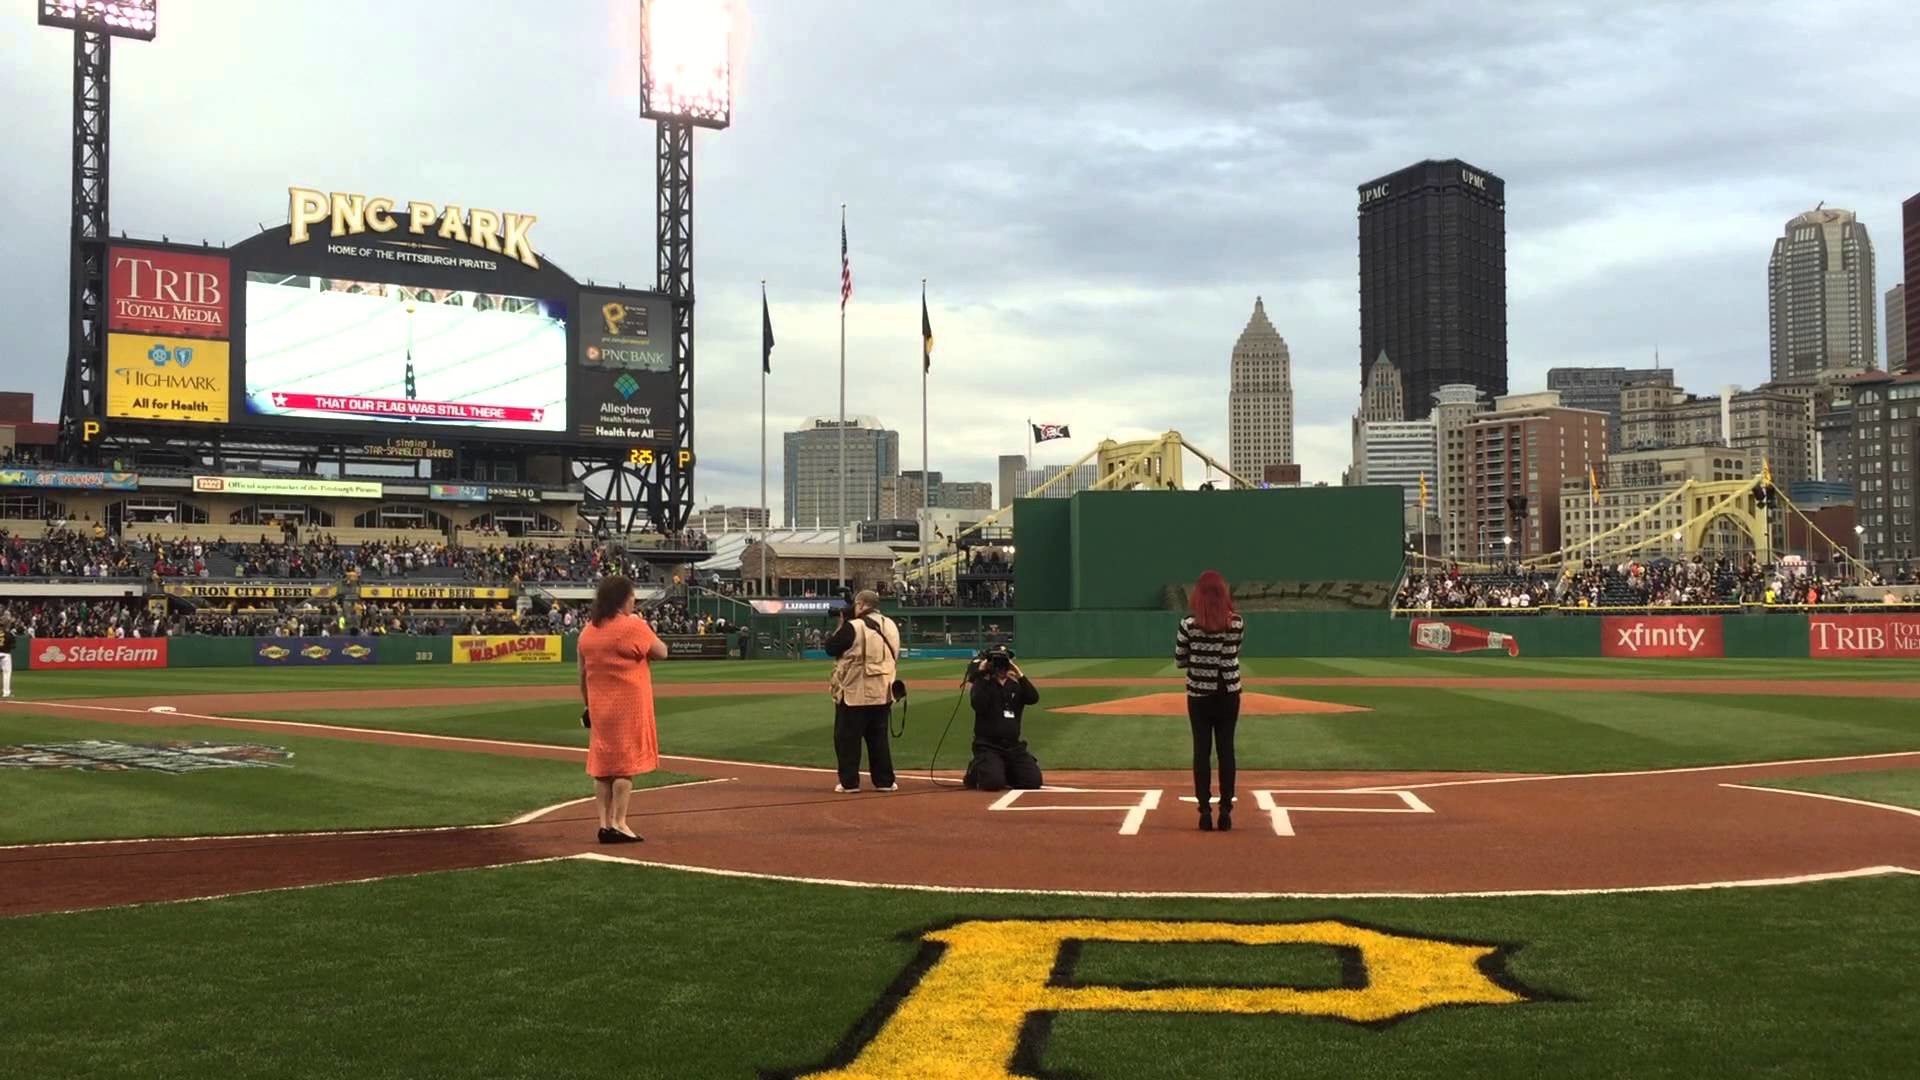 1920x1080 Our National Anthem sung by 14 yr old Aubrey Burchell at PNC Park for the  Pittsburgh Pirates